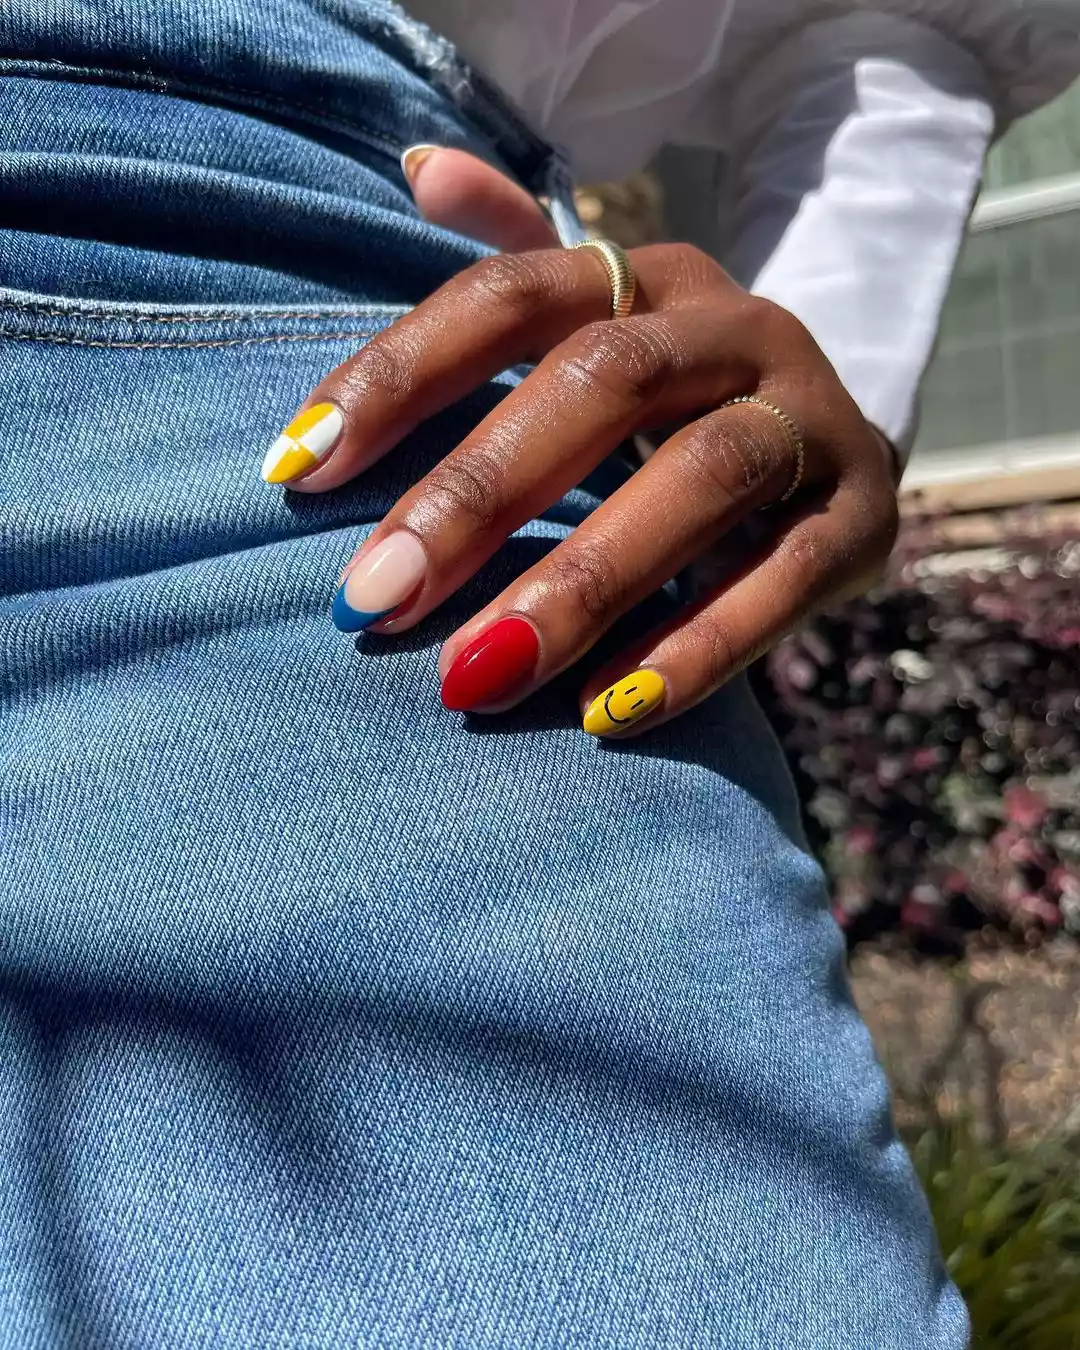 Black person's hand with mismatched nail art. 